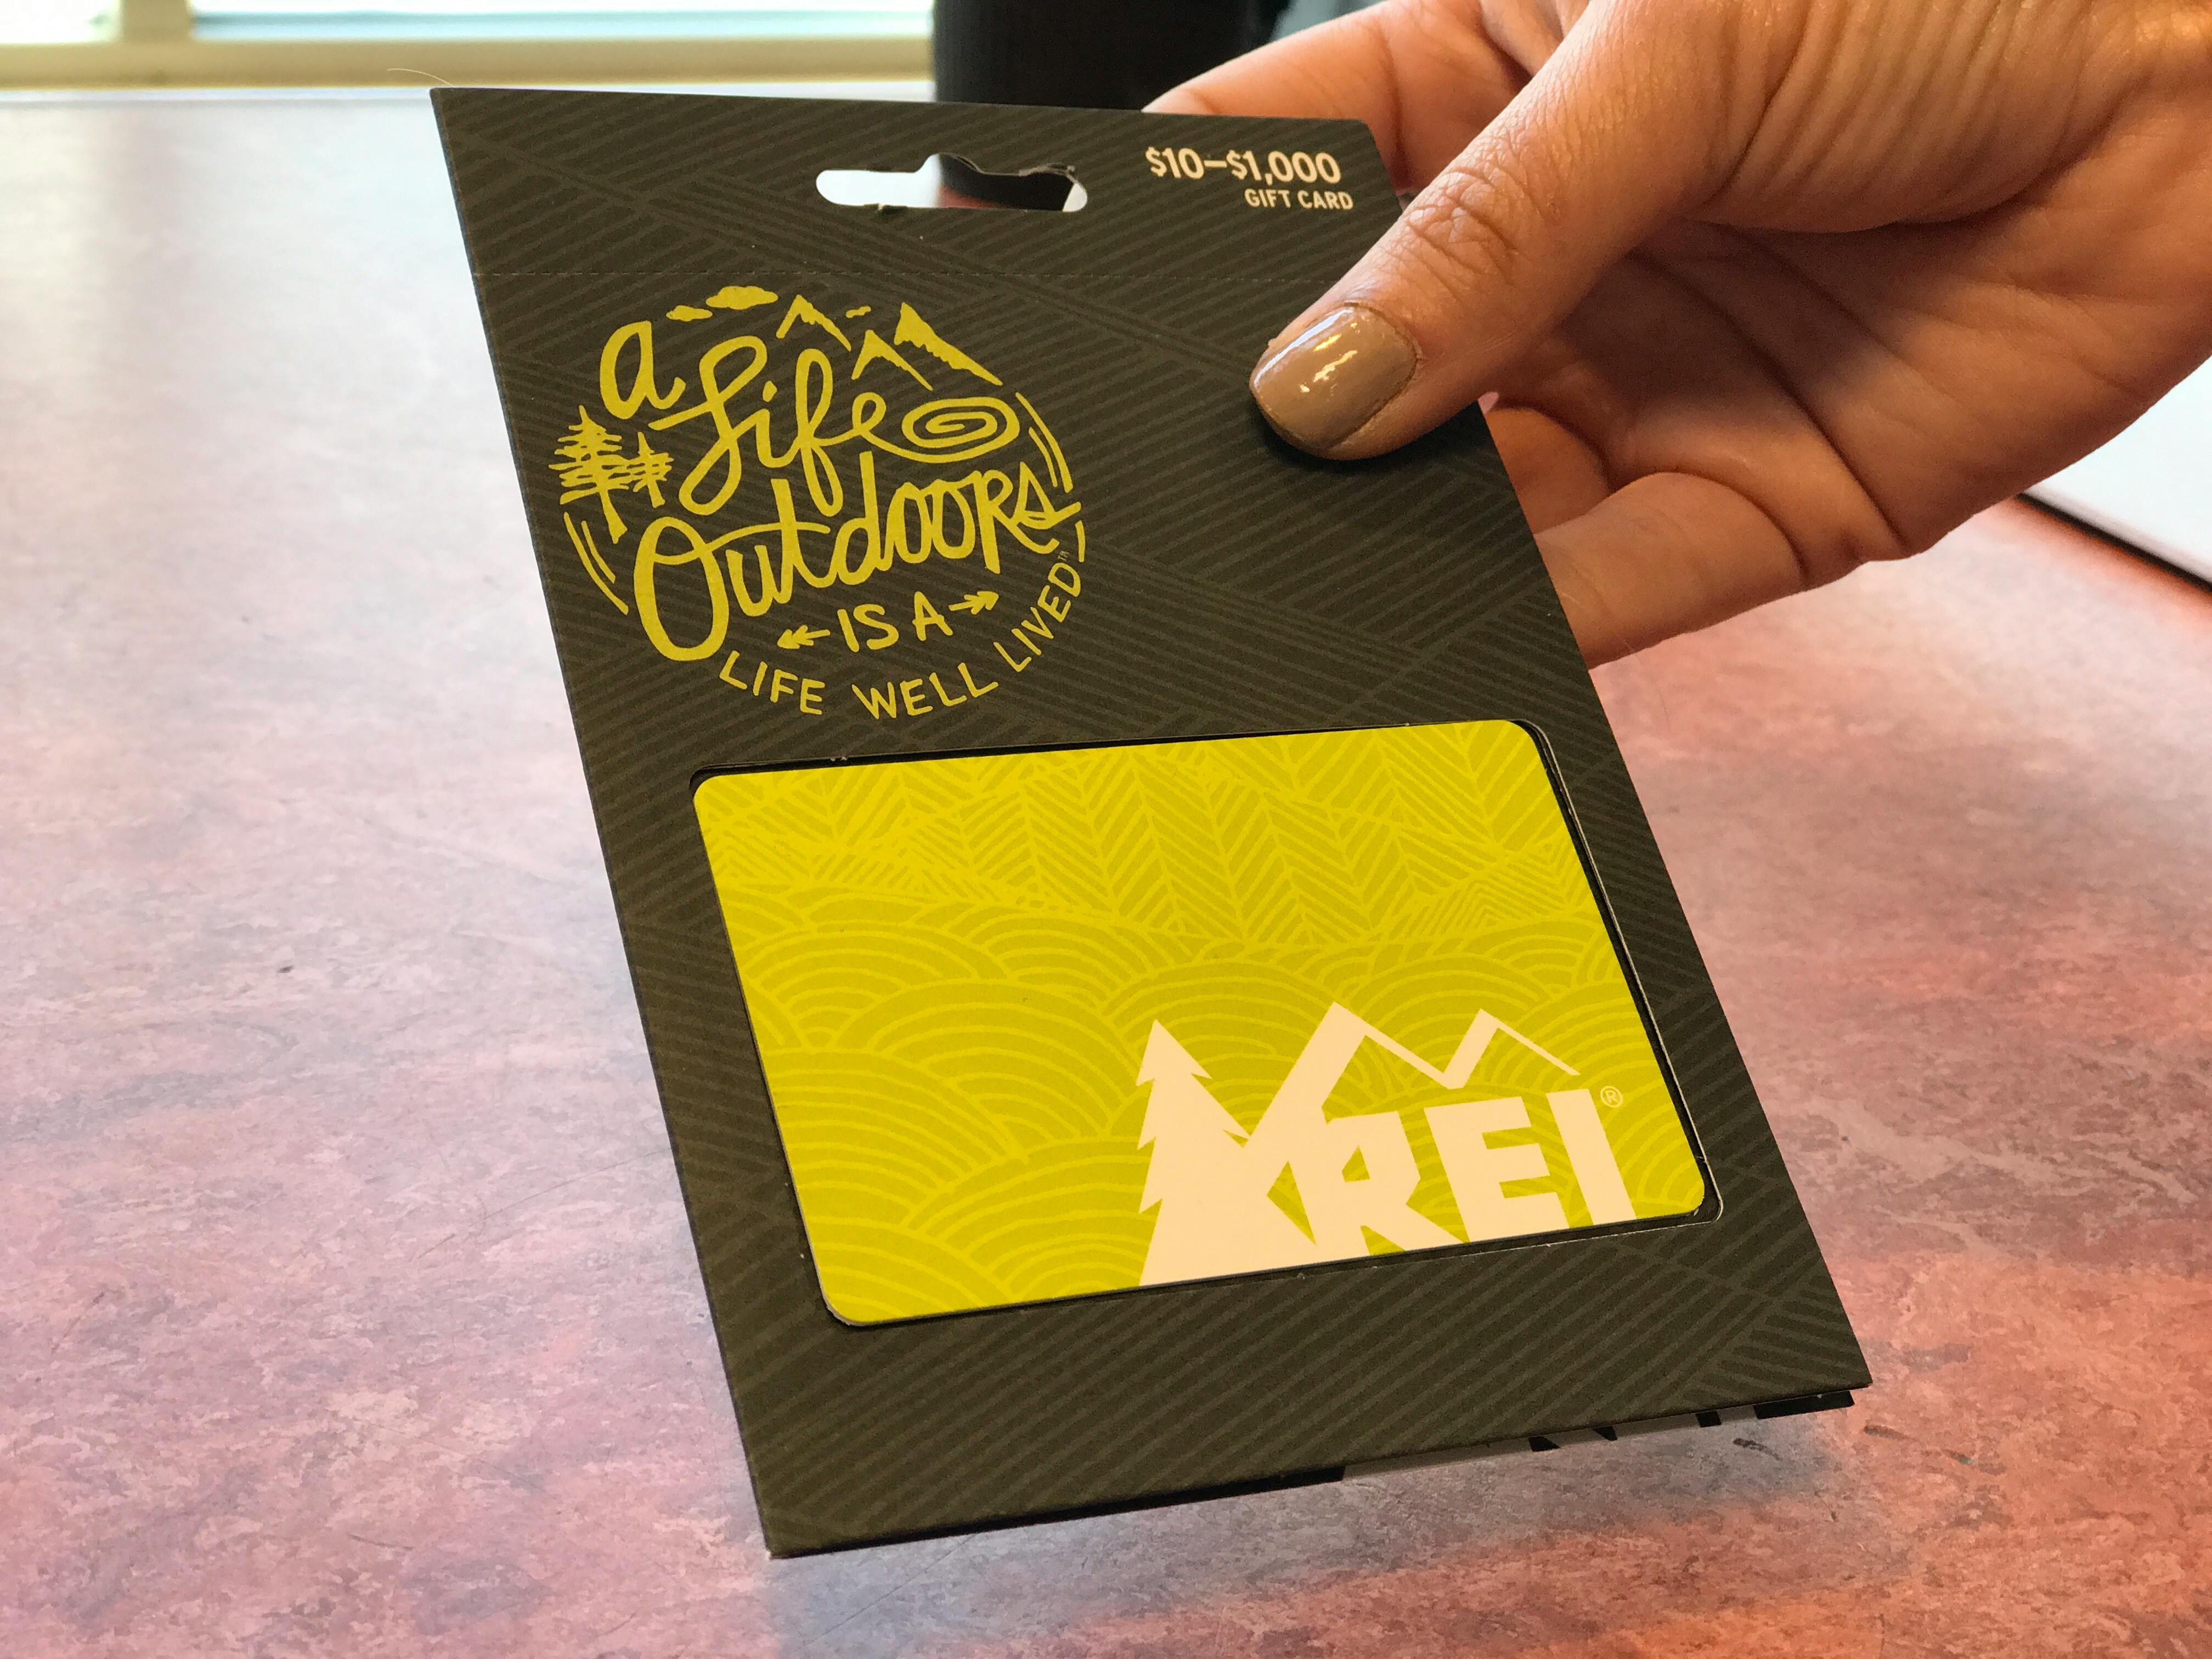 A person's hand holding a REI gift card above a counter.